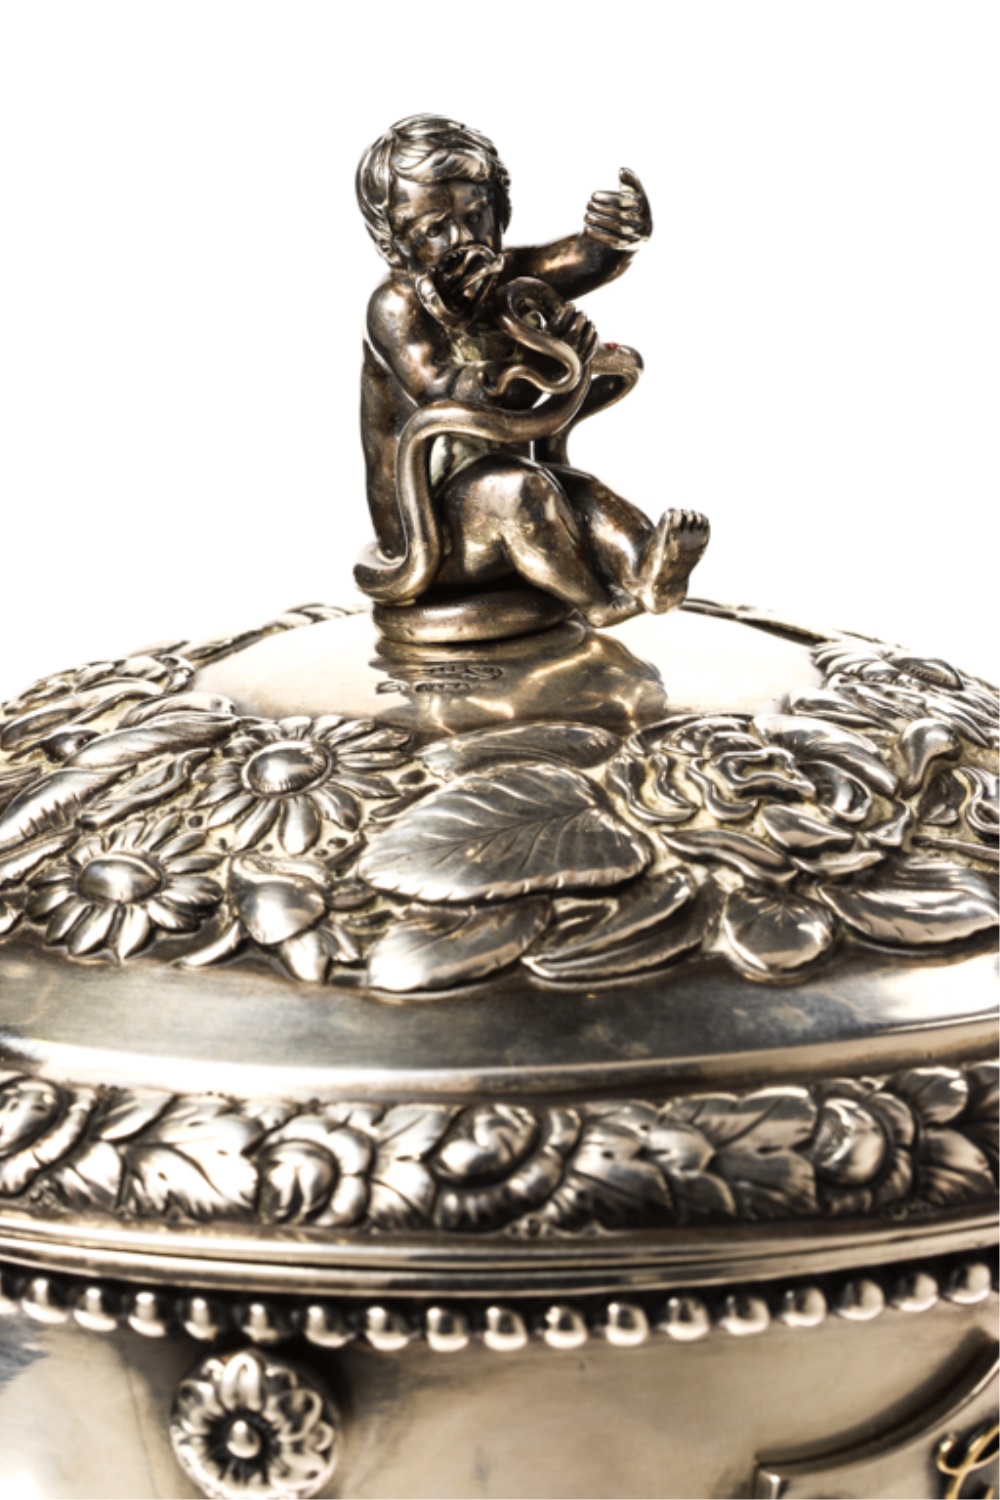 Finial Detail, Covered Historical Silver Presentation Cup, From John McInnis Auctioneers Two Day May, 2019 Estates Auction.